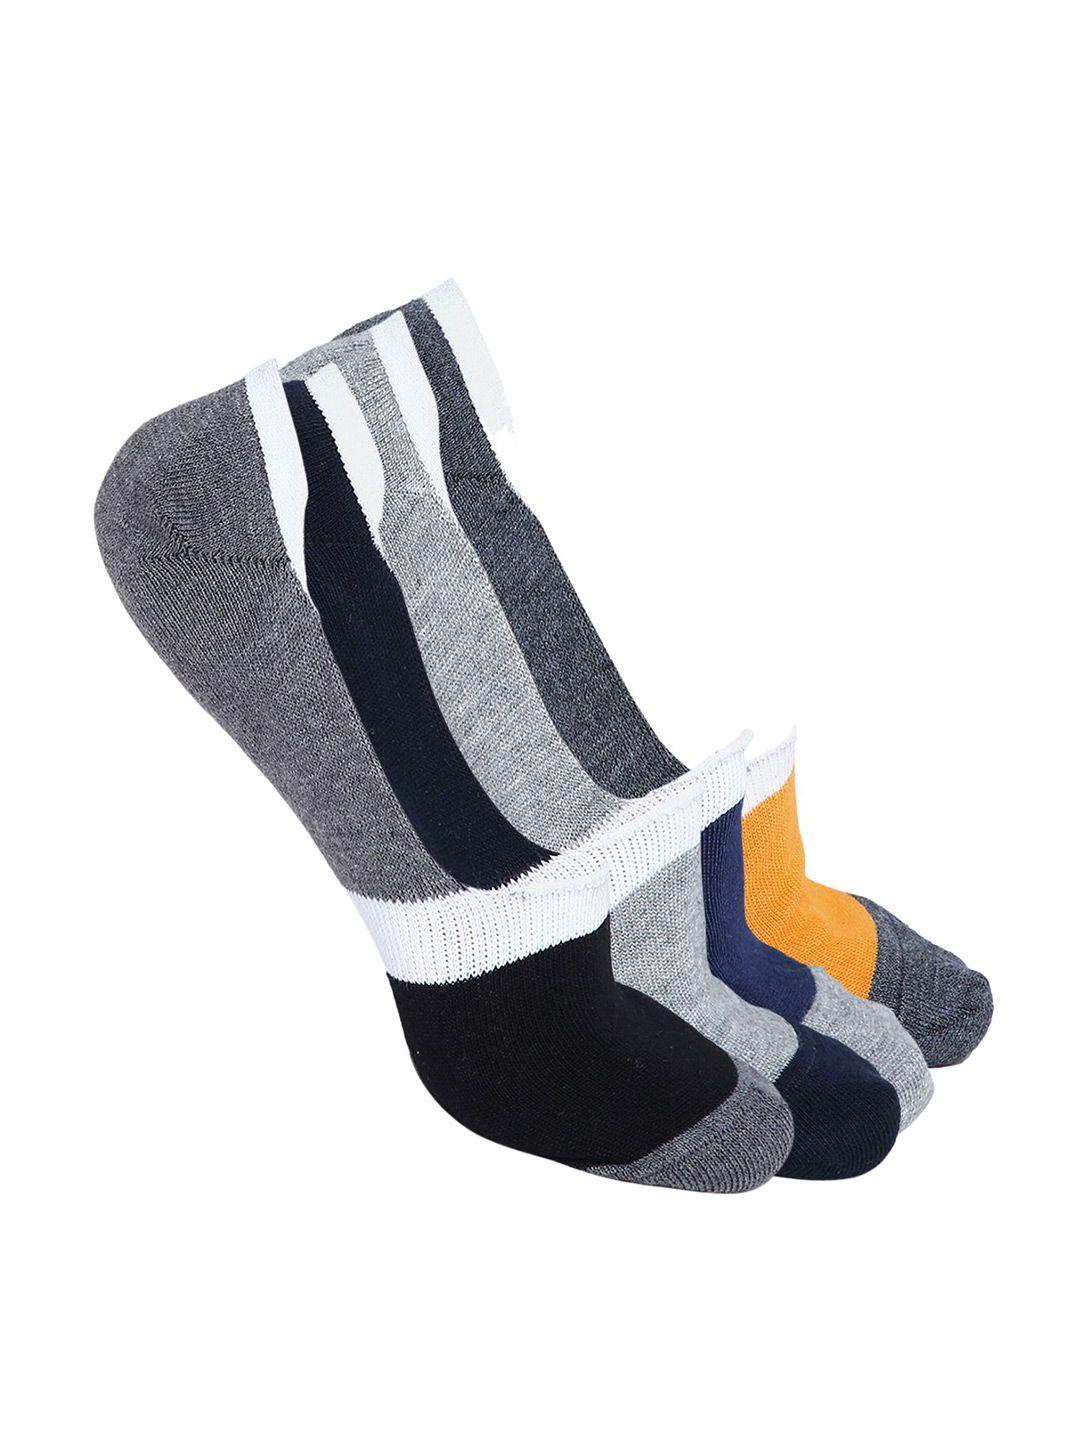 baesd pack of 4 colorblocked patterned shoe liners socks